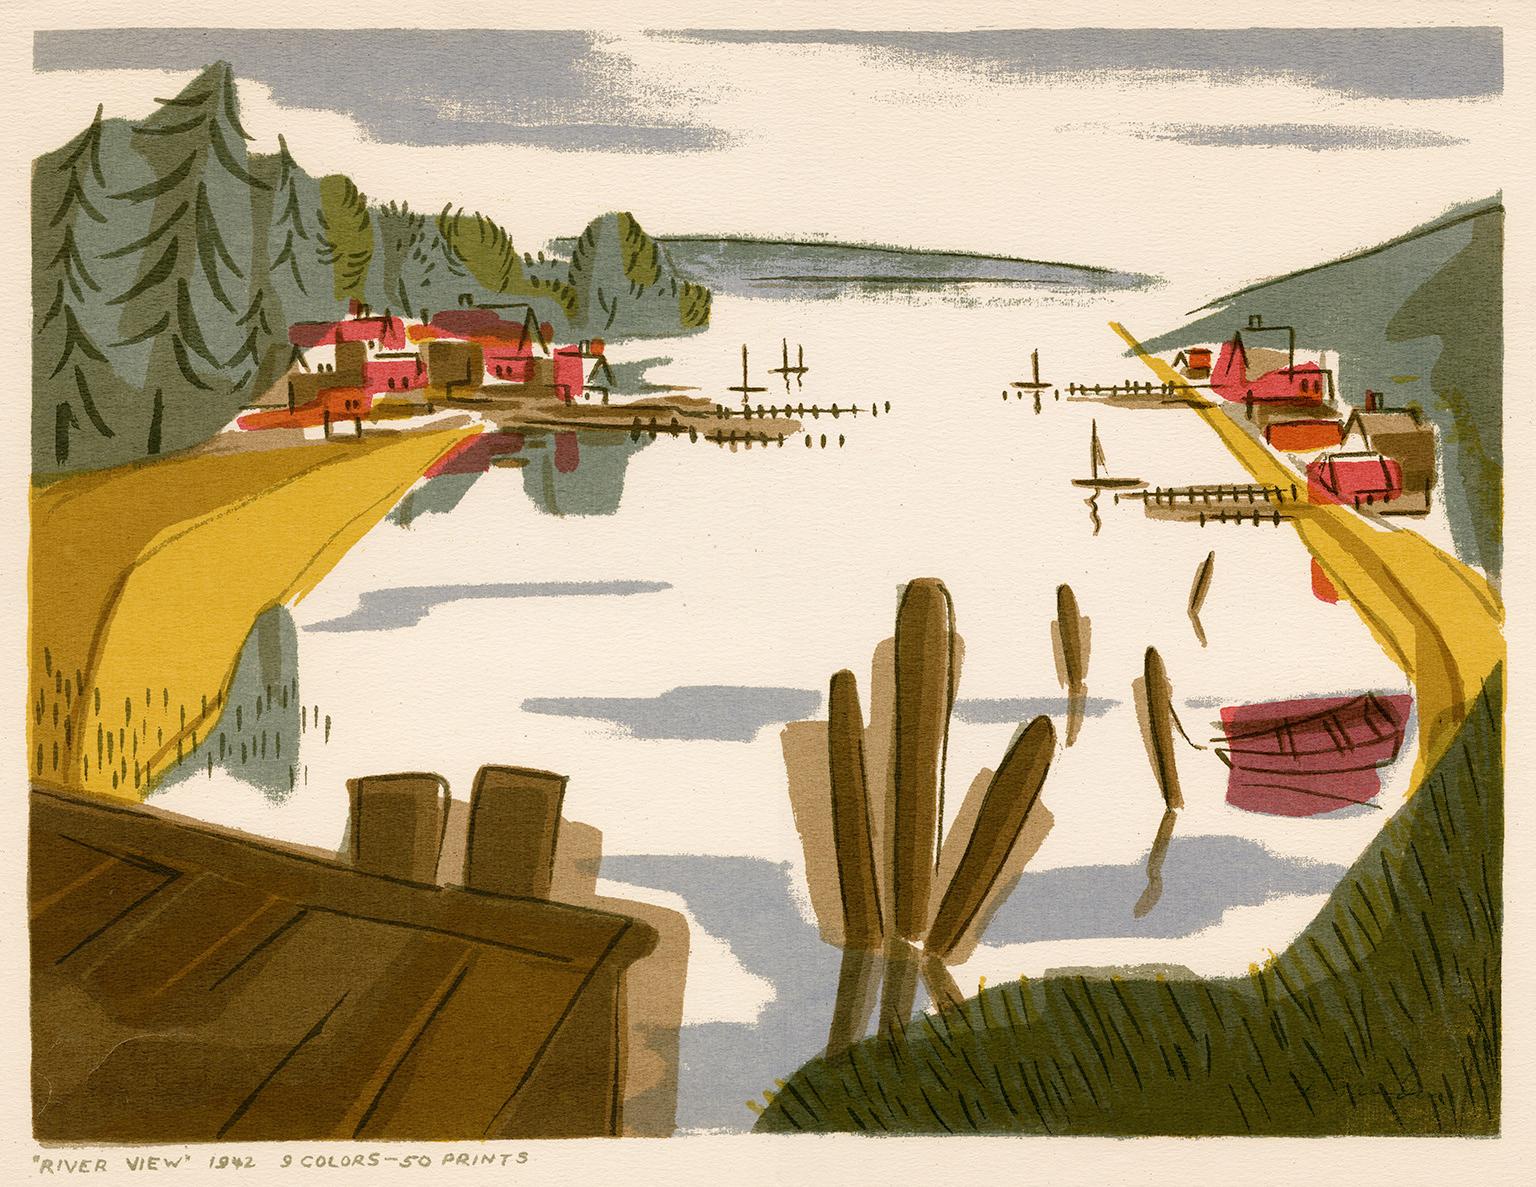 Edward August Landon Abstract Print - 'River View' — 1940s American Modernism